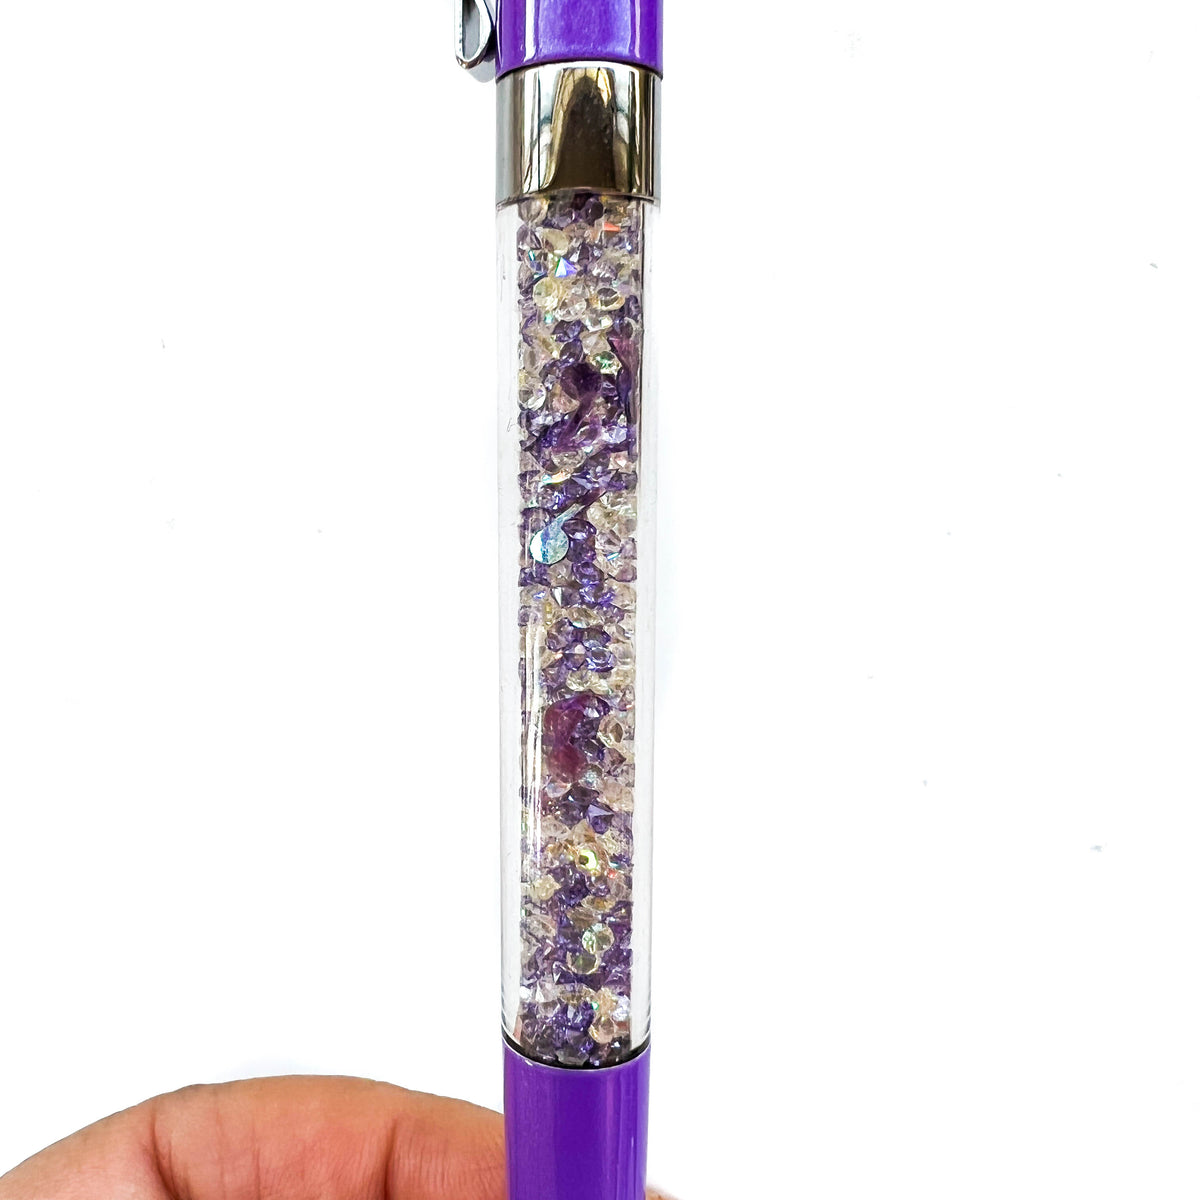 Dreaming of You Crystal VBPen | limited pen